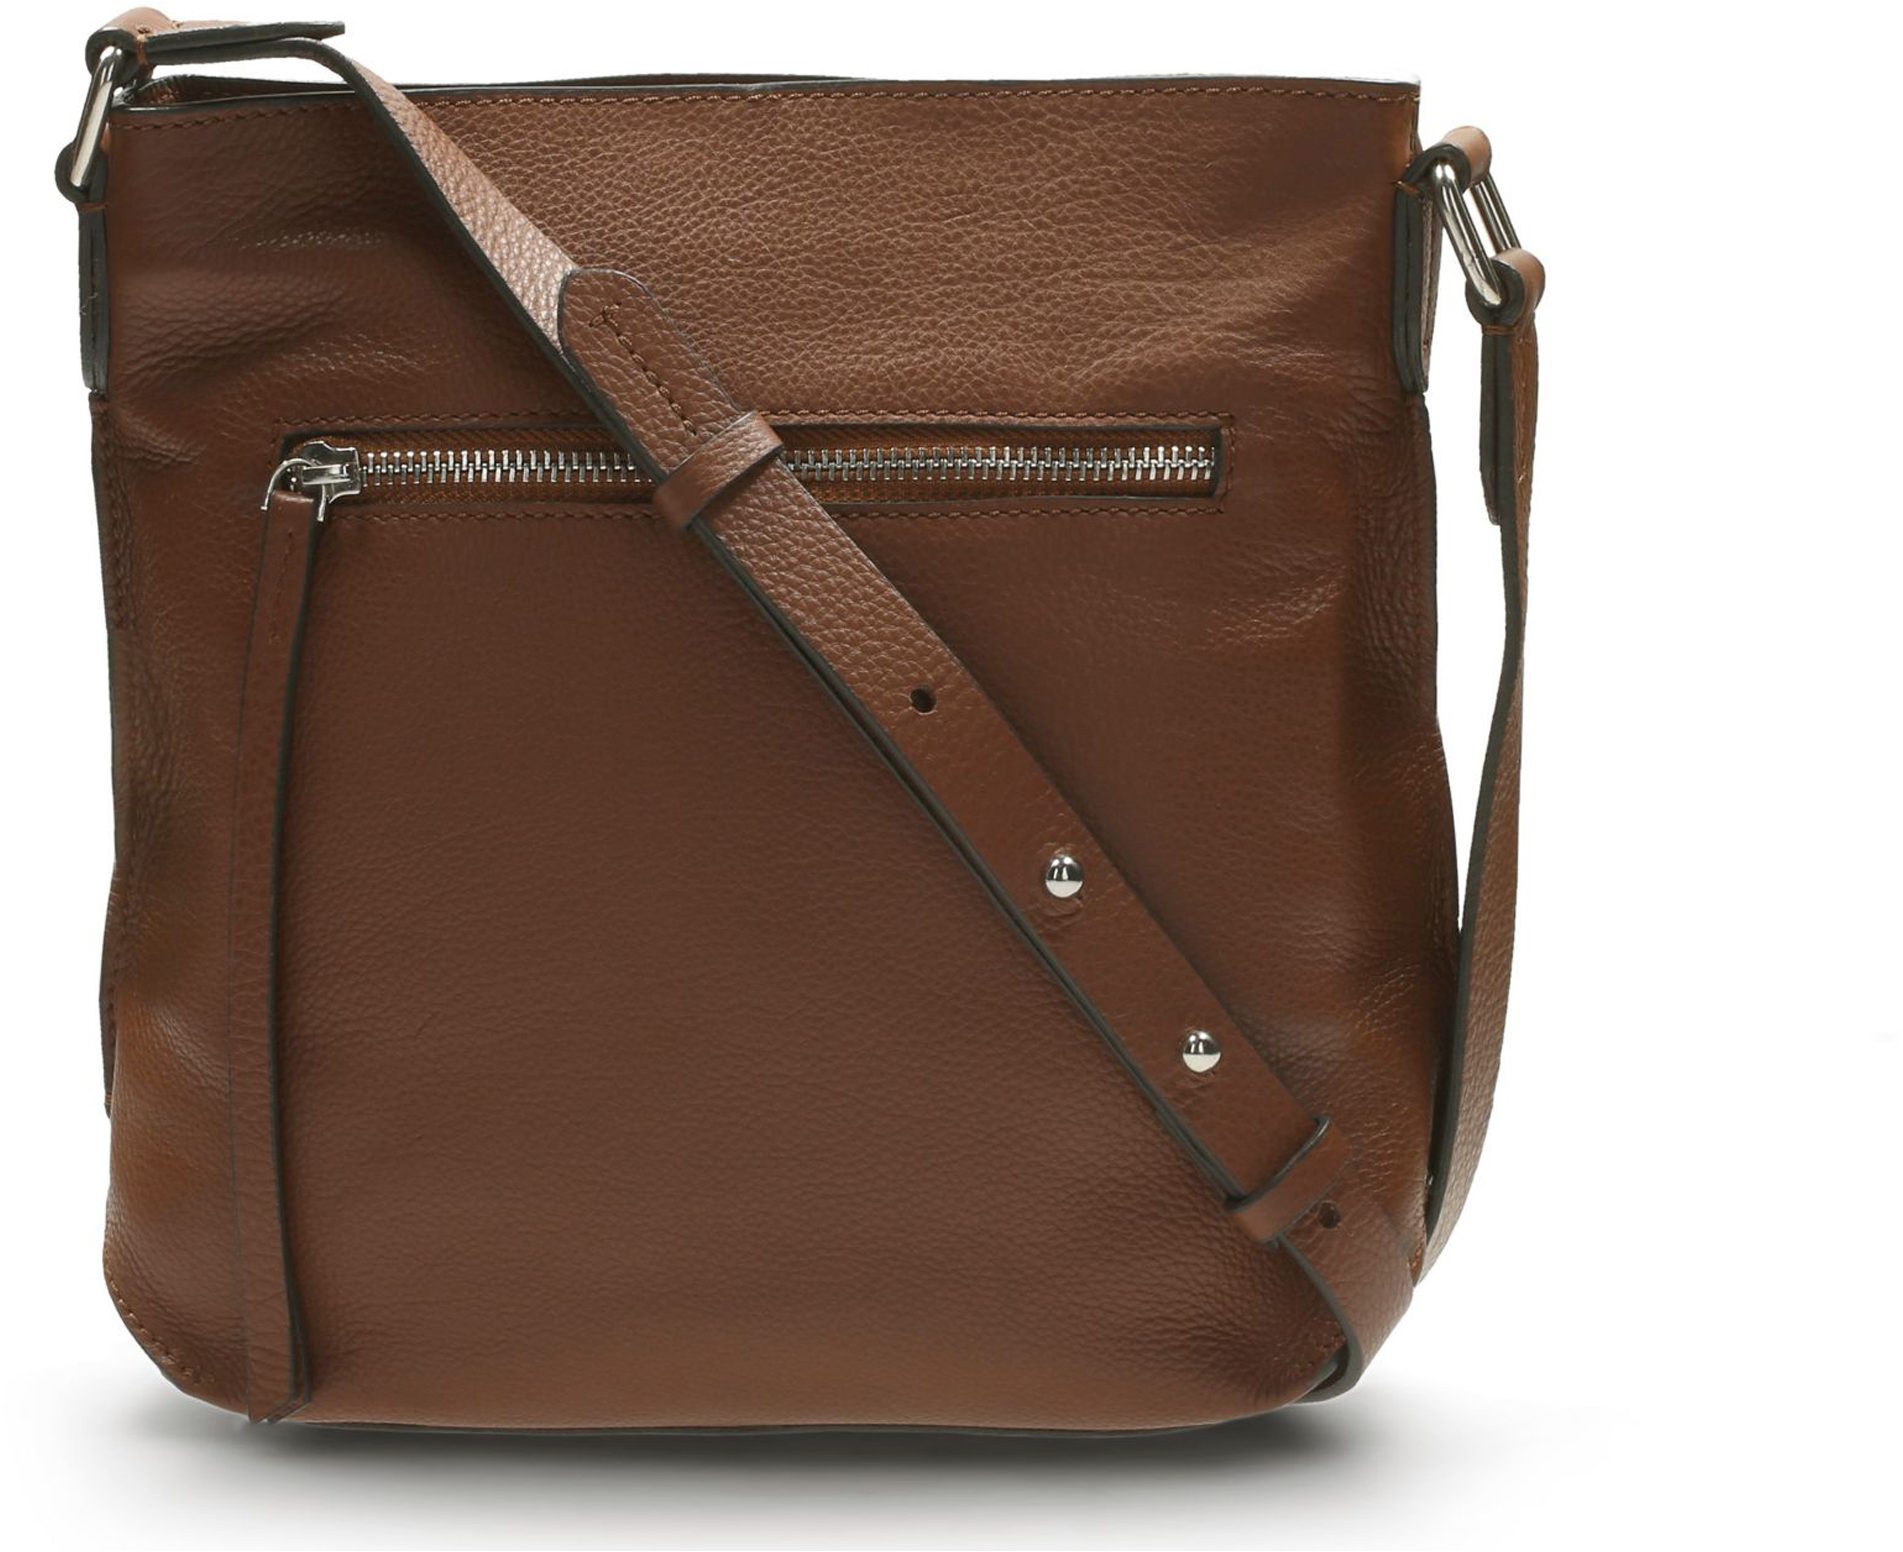 Clarks Topsham Tan Leather Cross Body Bags - Shoes